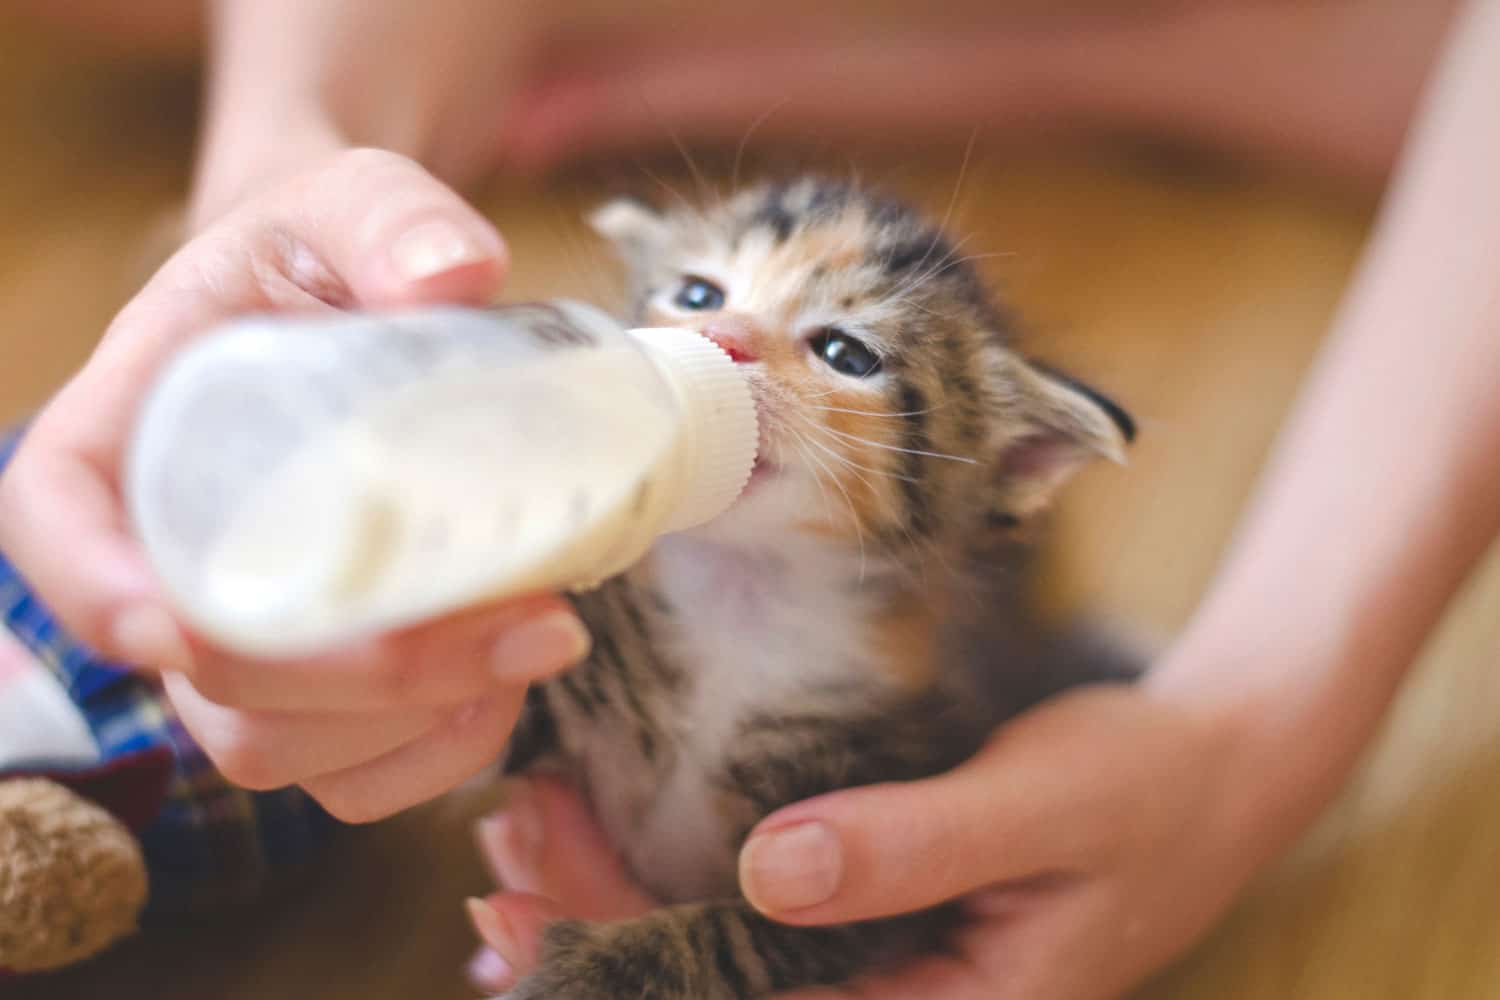 Rescued tiny baby cat hand fed with milk from a nursing bottle; calico kitten with baby blue eyes, held and nursed by a young woman. Adopt don't shop, spay and neuter